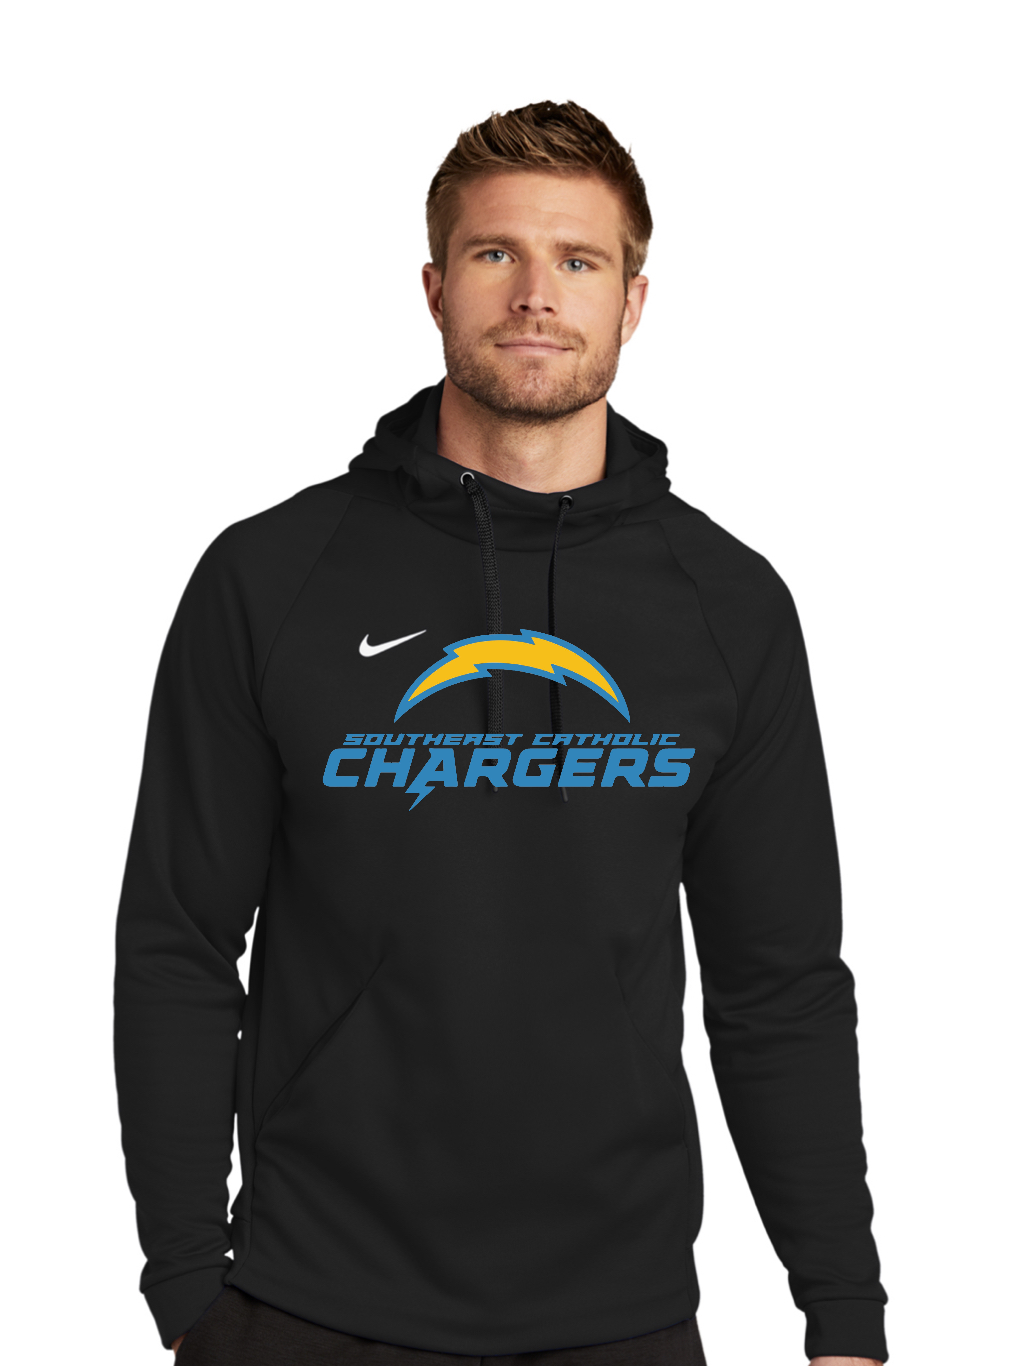 SE Catholic Chargers Nike Therma-Fleece Hoodie (Adult Only) – Seven Sons  Printing Co